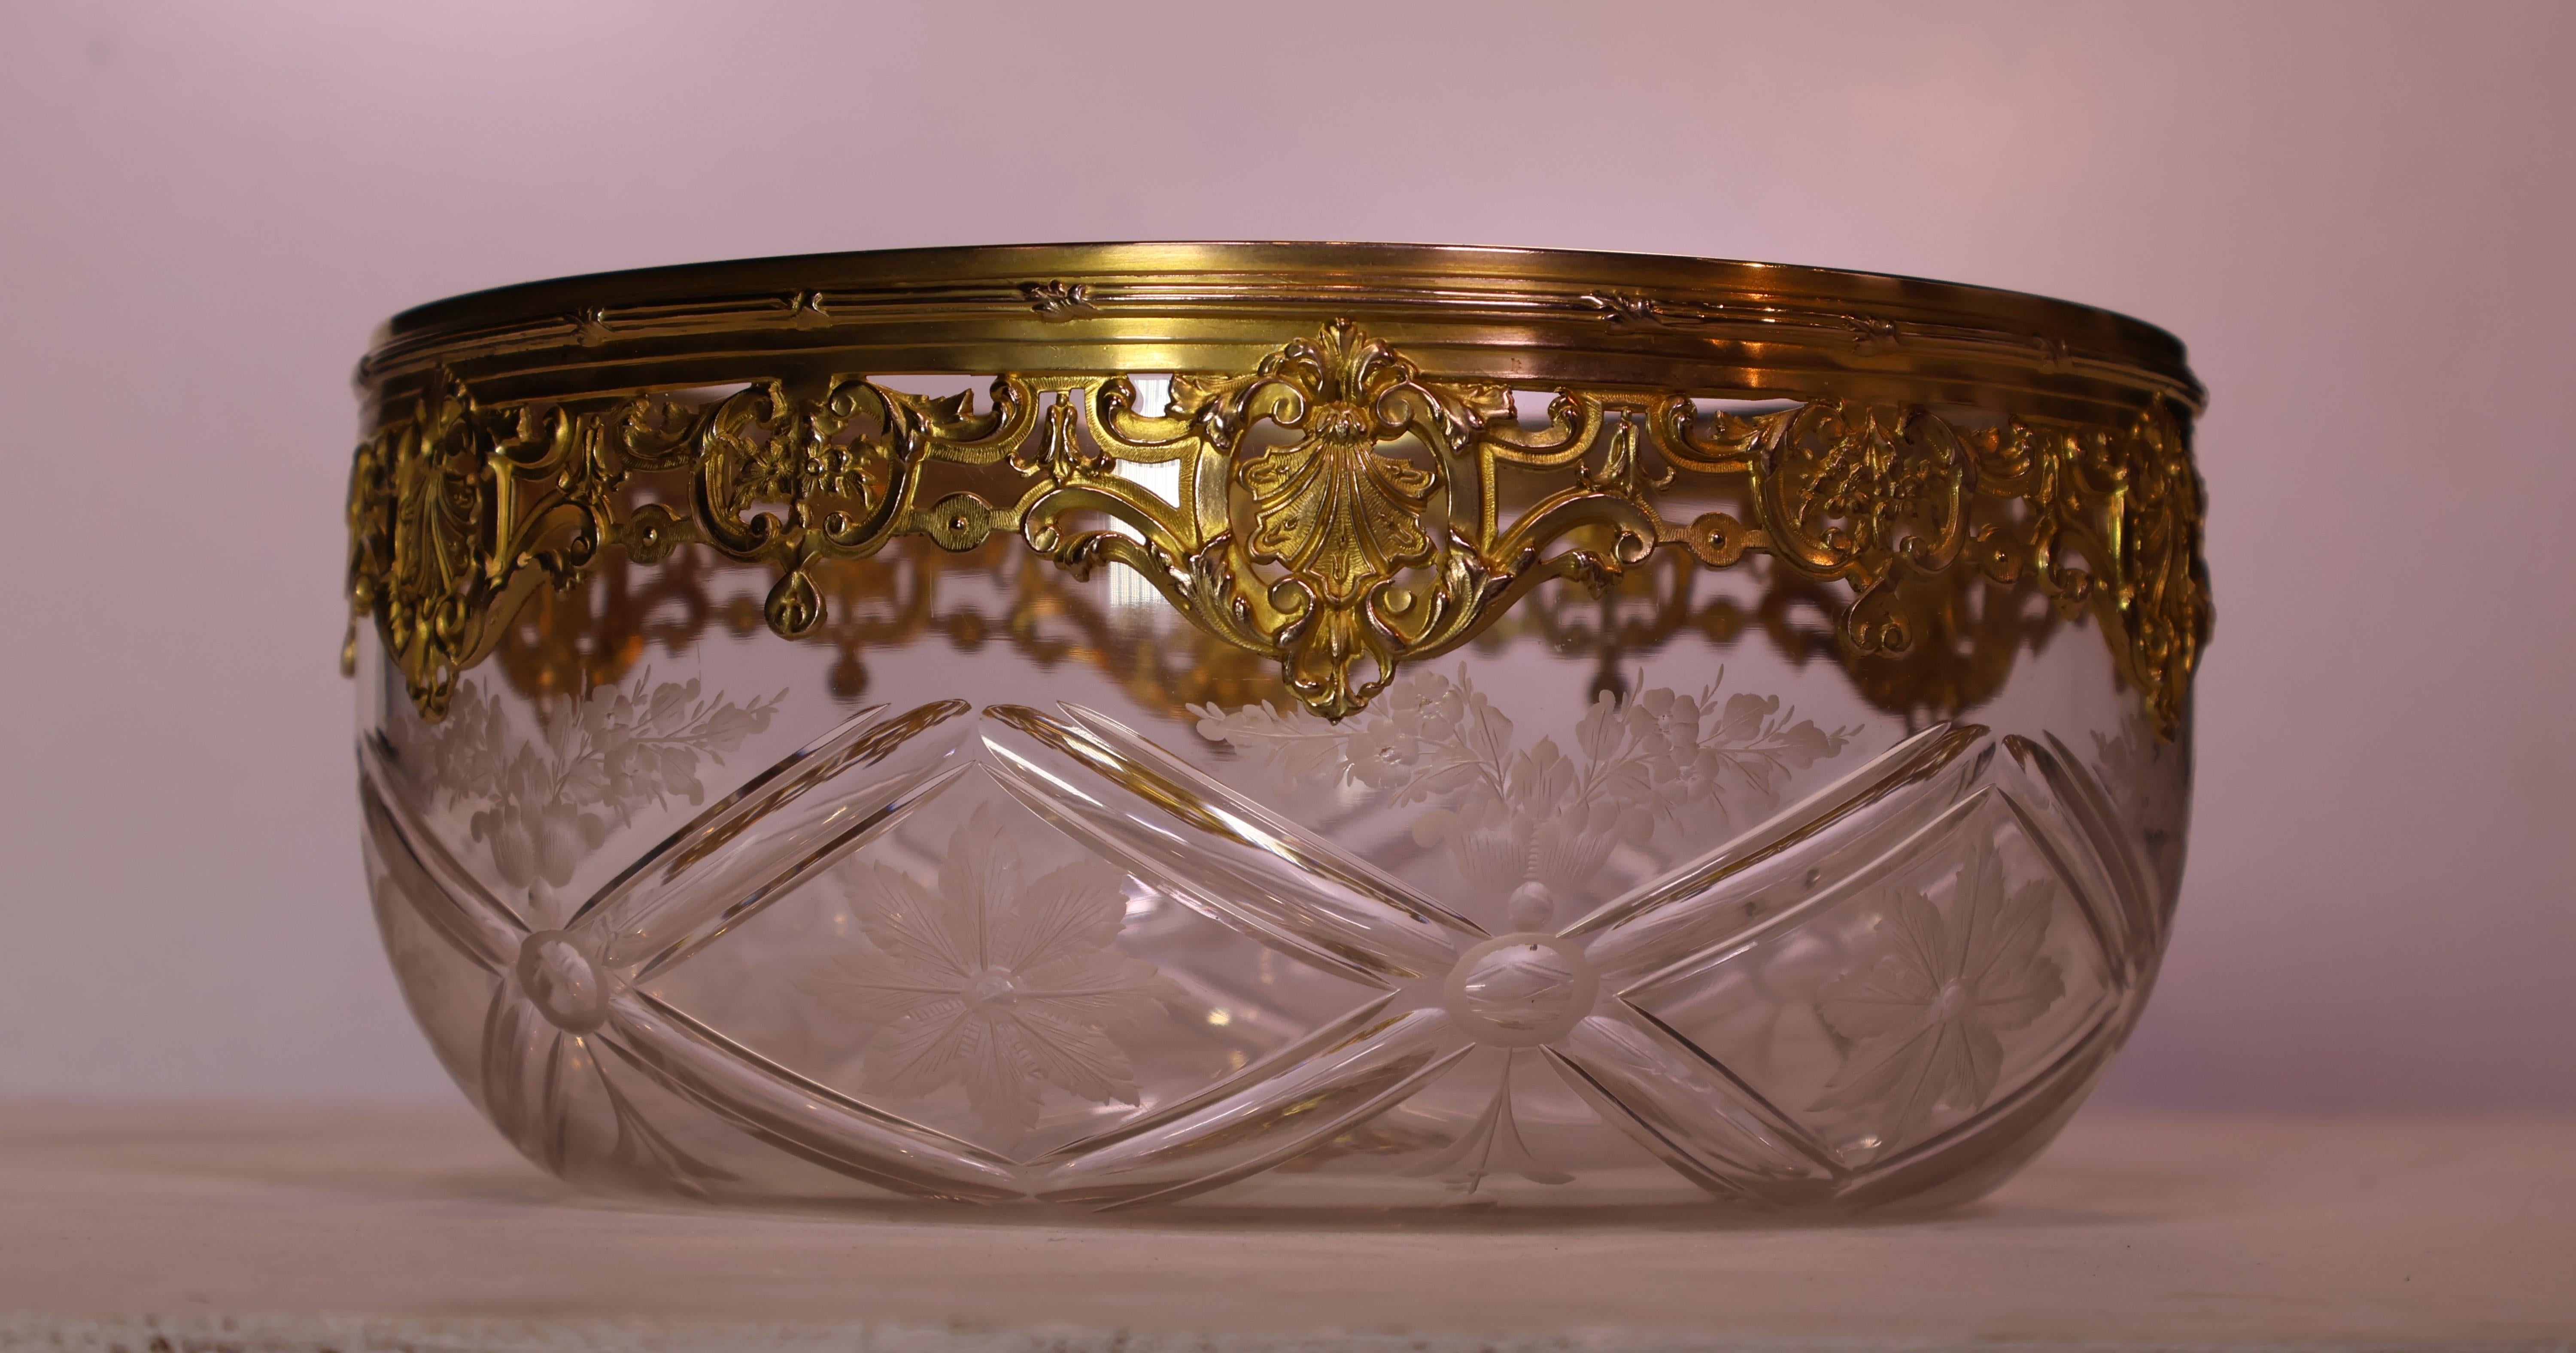  A Very Fine Crystal Centerpiece, cut and wheel engraved. Exquisite Gilt Bronze Rim, chaised and pierced. France, circa 1890.
Diameter 8 3/4